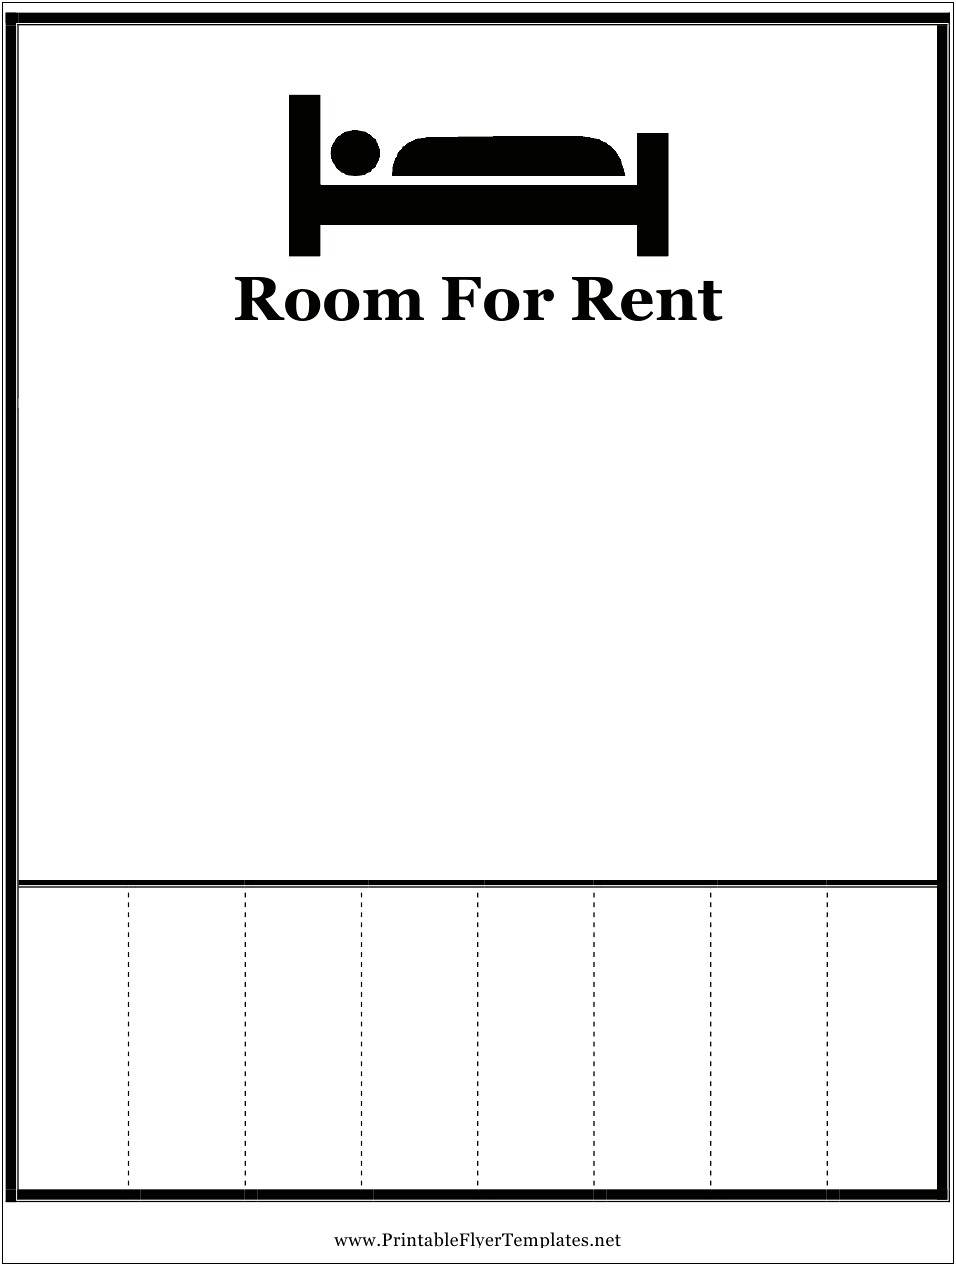 Room For Rent Ad Template Word